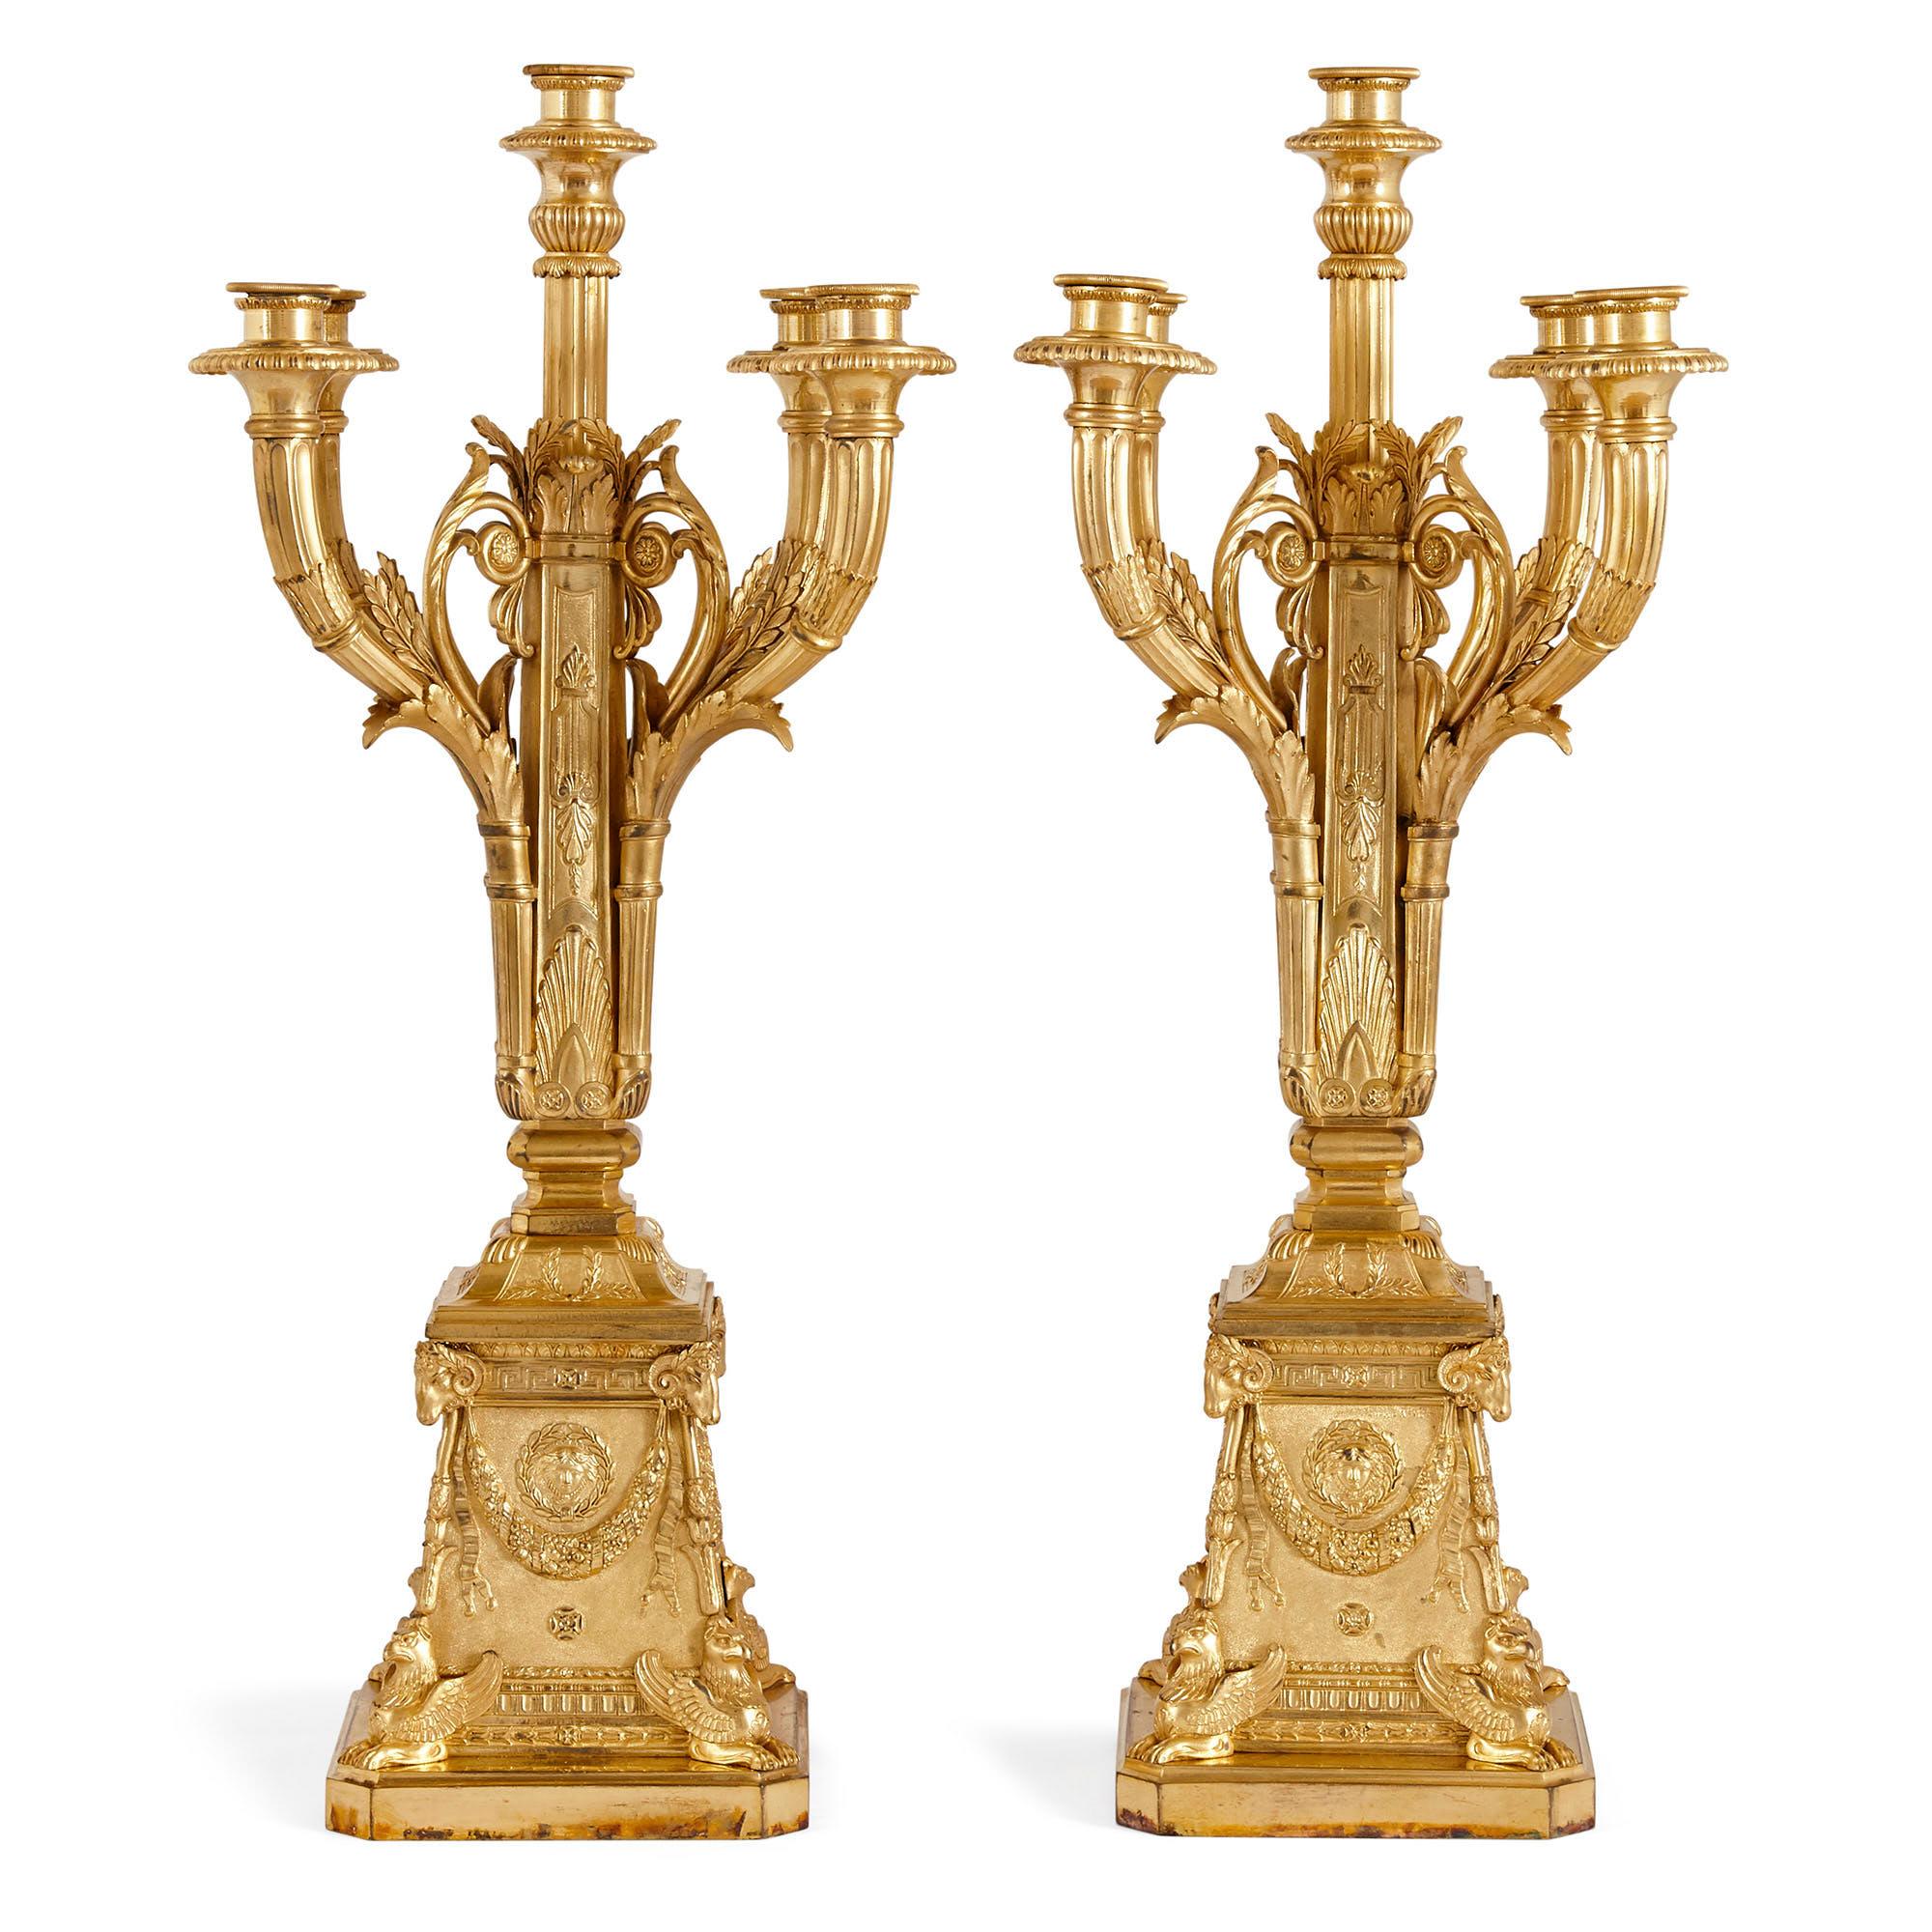 Pair of neoclassical style gilt bronze candelabra by Susse Frères
French, circa 1900
Measures: Height 62cm, width 24cm, depth 24cm

Each candelabrum in this pair is designed in the Louis XVI style and wrought from Fine gilt bronze. Each features